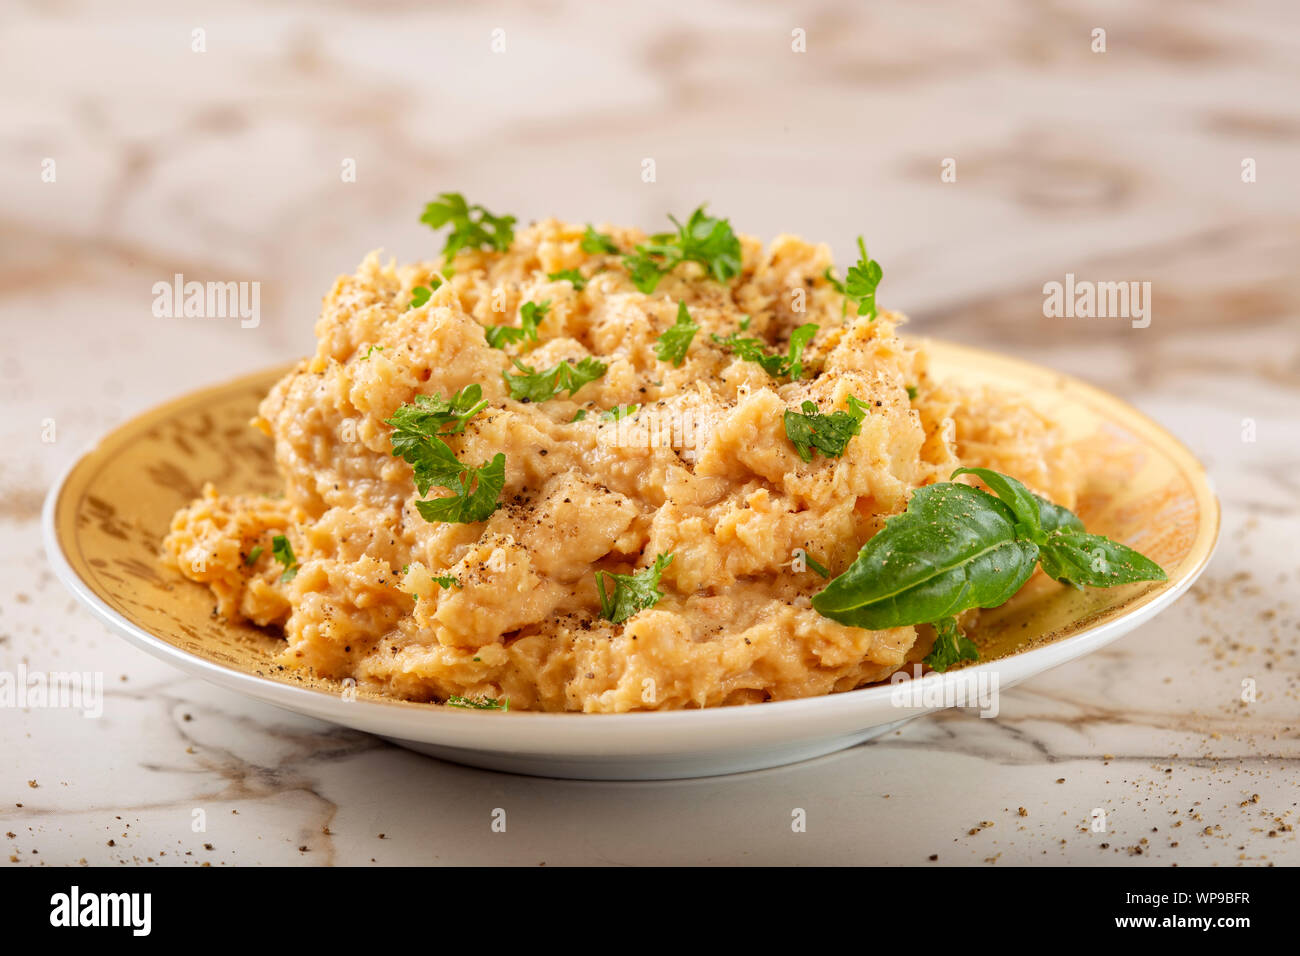 Chicken spread made from minced chicken meat, mayonnaise and ketchup on plate Stock Photo